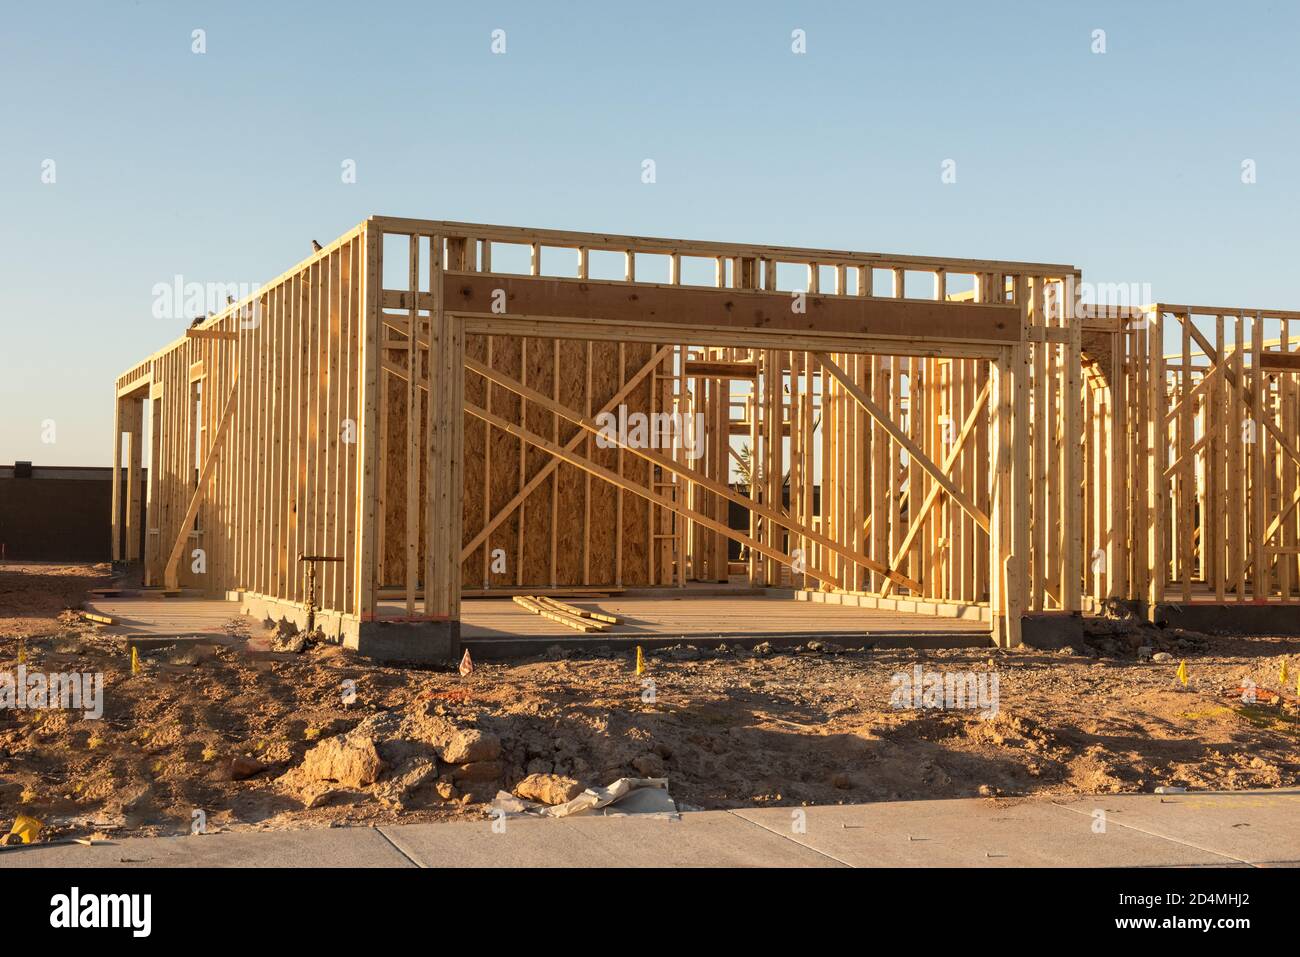 A partial view of a new house construction showing the wood frame before the siding and roofing stands in early morning light on a dirt lot, horizontal view. Stock Photo